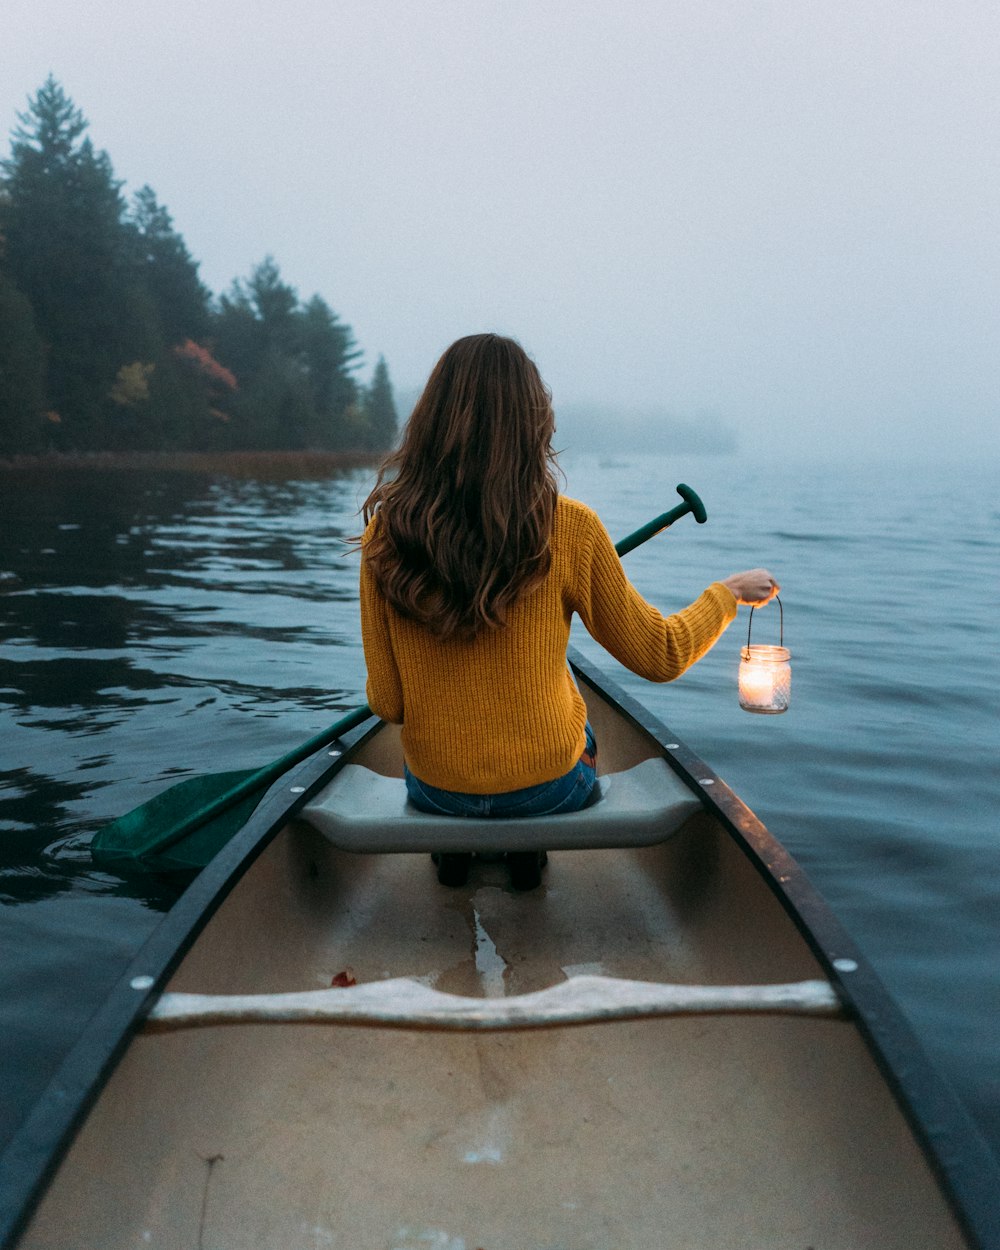 woman sitting and holding lamp on wooden canoe viewing calm body of water